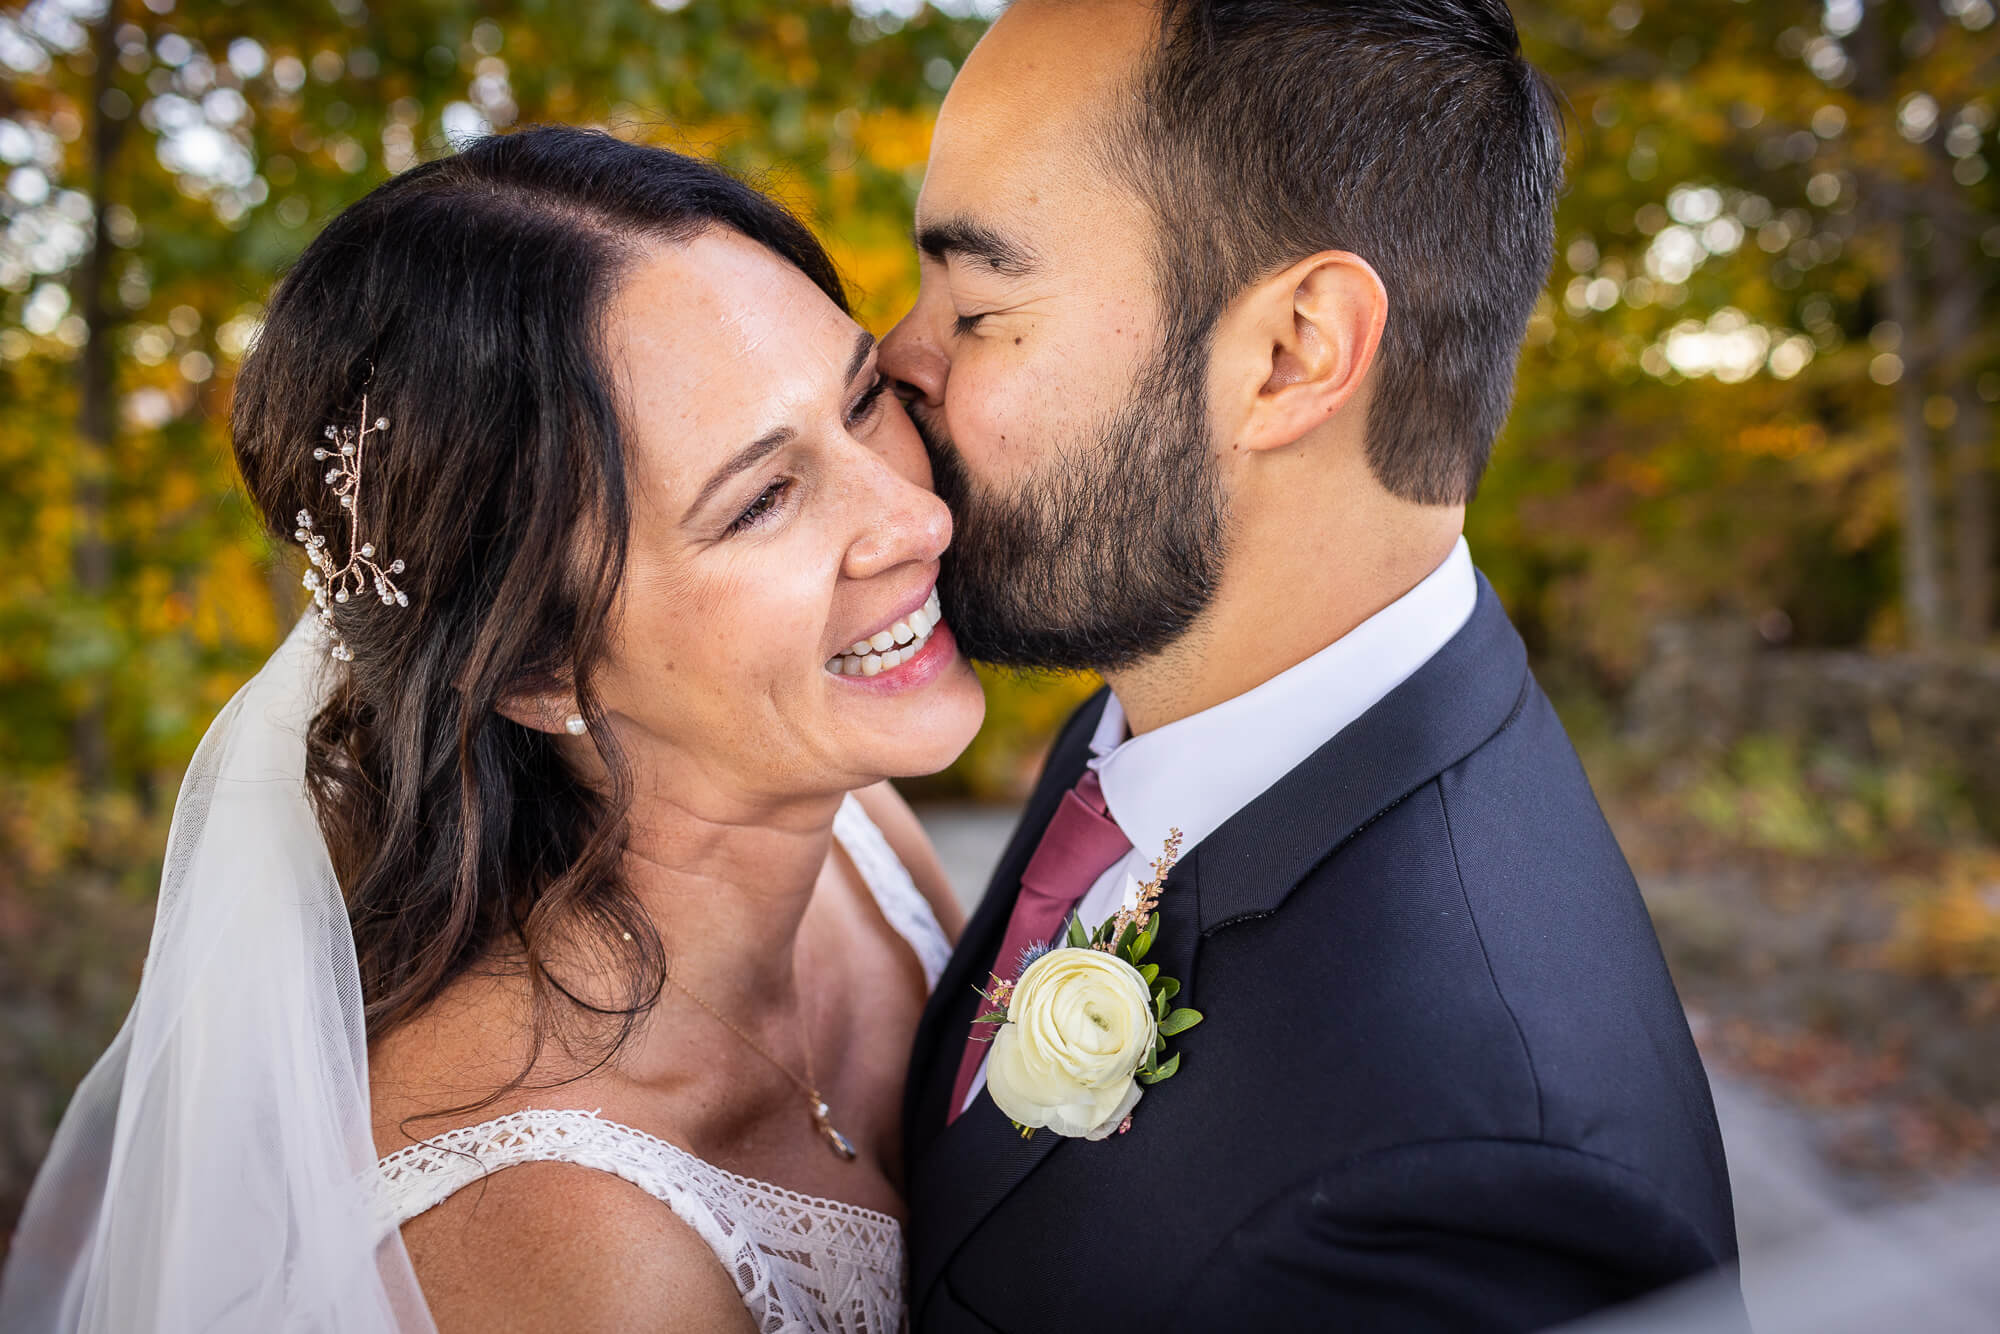 Groom kissing bride on the cheek she is smiling big in front of autumn leaves-Wedding-Photographer-audrey-cutler-photography